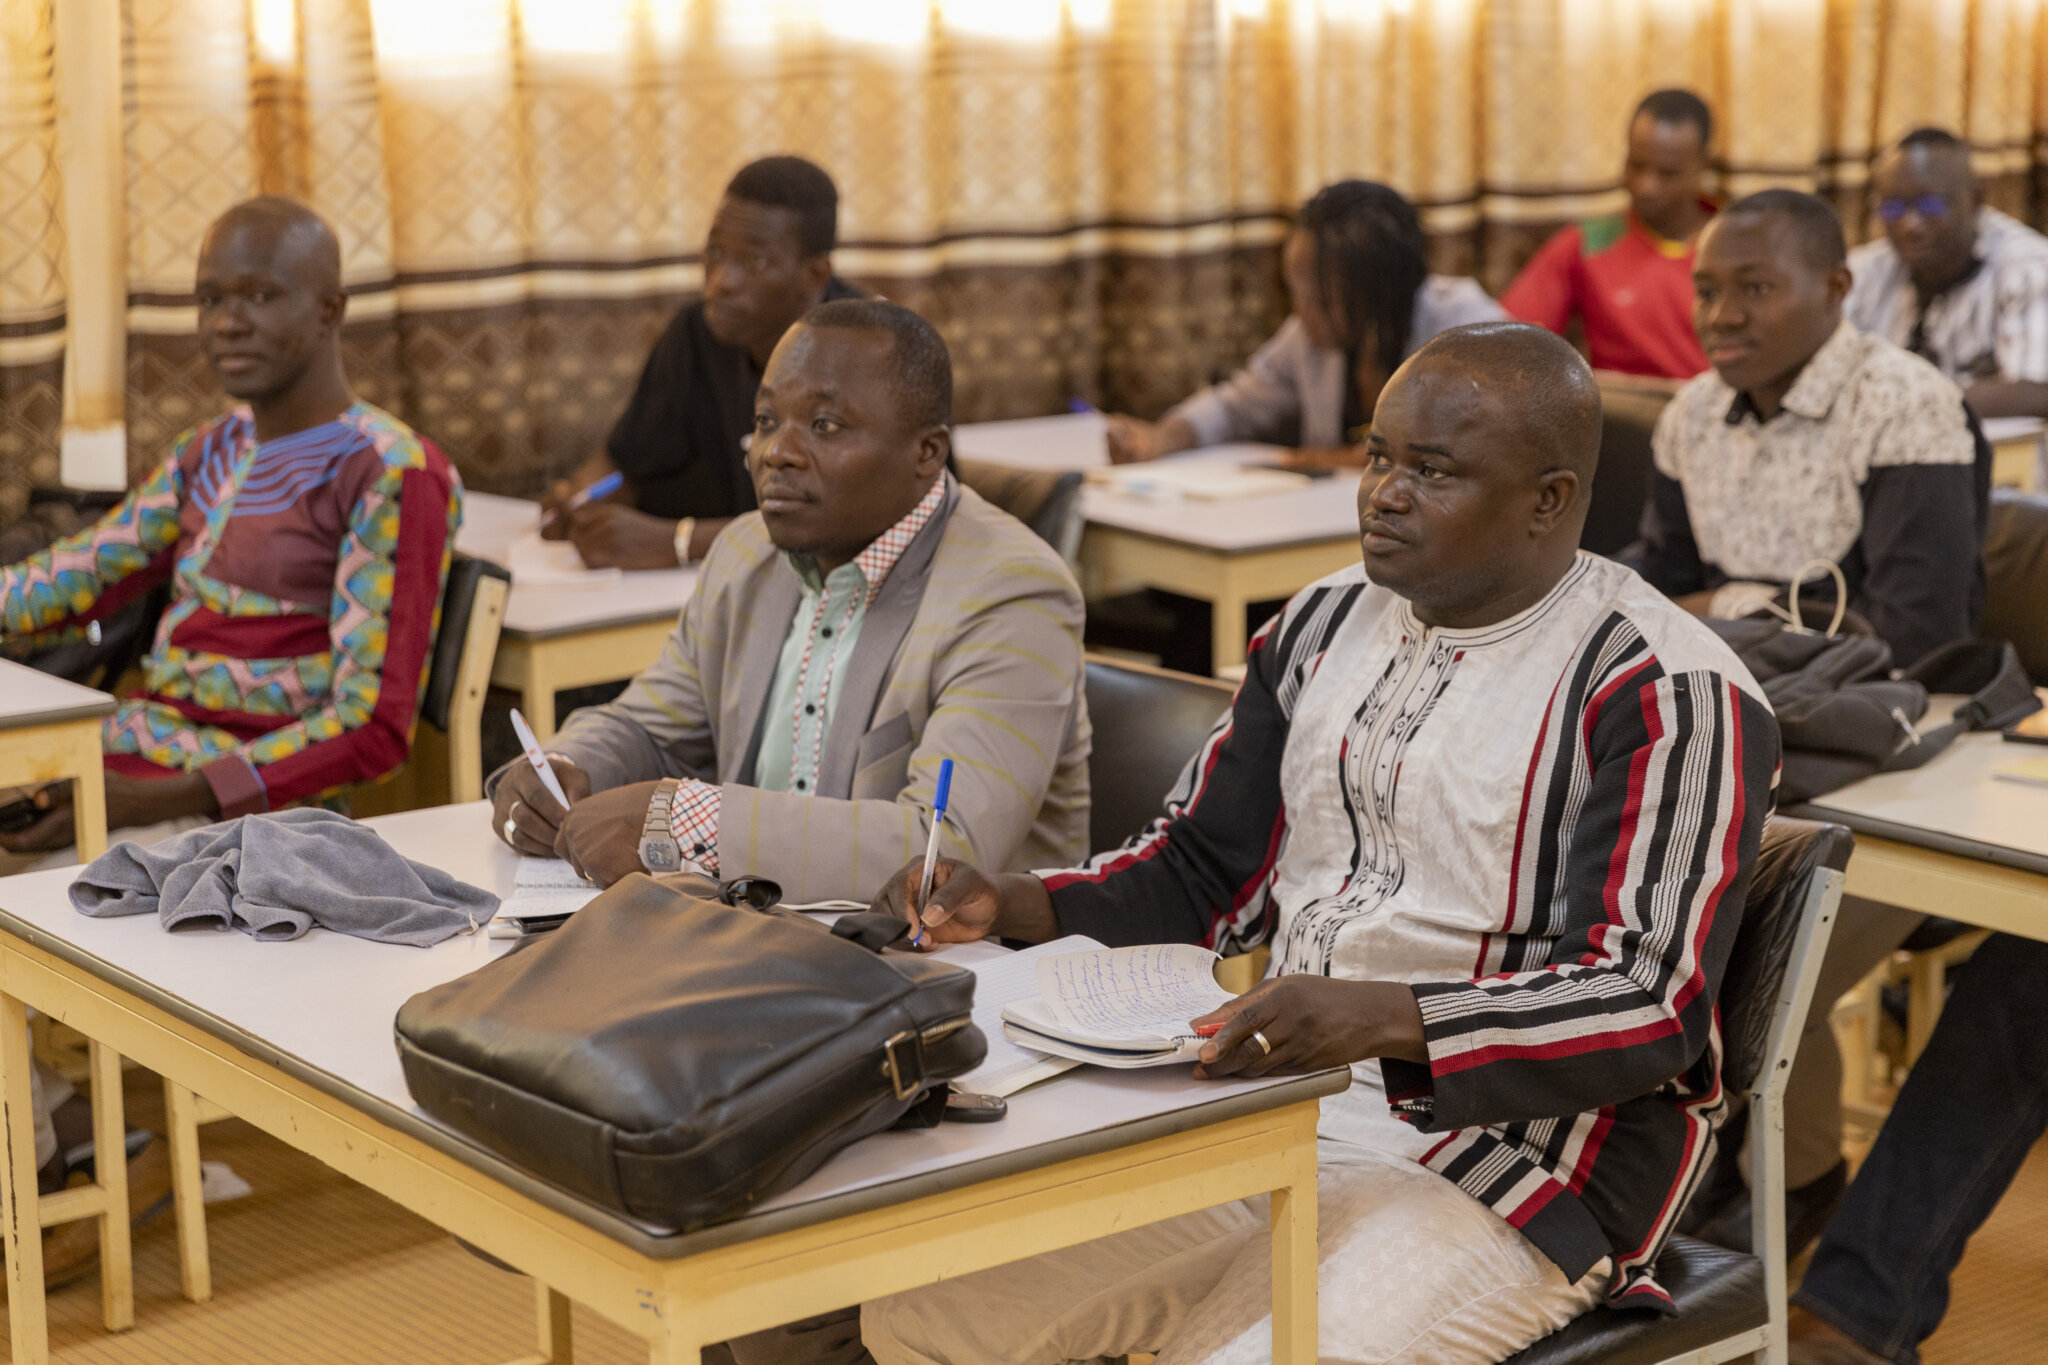 7 March 2020 - Ouagadougou, Burkina Faso. Students of the anti-corruption master at the Ouaga II University. 

Supported by UNODC, Burkina Faso has launched its first master's programme on anti-corruption in March 2019. The master's project was developed with technical support from UNODC and Tunisian academics, who shared their own experience with the Burkina academics in a South-South cooperation perspective.

Education is a fundamental tool to prevent crime and corruption. In addition to promoting a culture that supports the rule of law, crime prevention and criminal justice, introducing anti-corruption curricula in higher education also helps to build the capacities of future professionals responsible for the fight against corruption

In supporting the fight against corruption through this master's programme, UNODC, through the Regional Programme for West Africa (2016-2020), intends to contribute to the achievement of Sustainable Development Goal (SDG) 16, which calls to "Promote peaceful and inclusive societies for sustainable development, provide access to justice for all and build effective, accountable and inclusive institutions at all levels",  This result was achieved under the framework of the Sahel Programme covering Burkina Faso.

UNODC / Aurélia Rusek